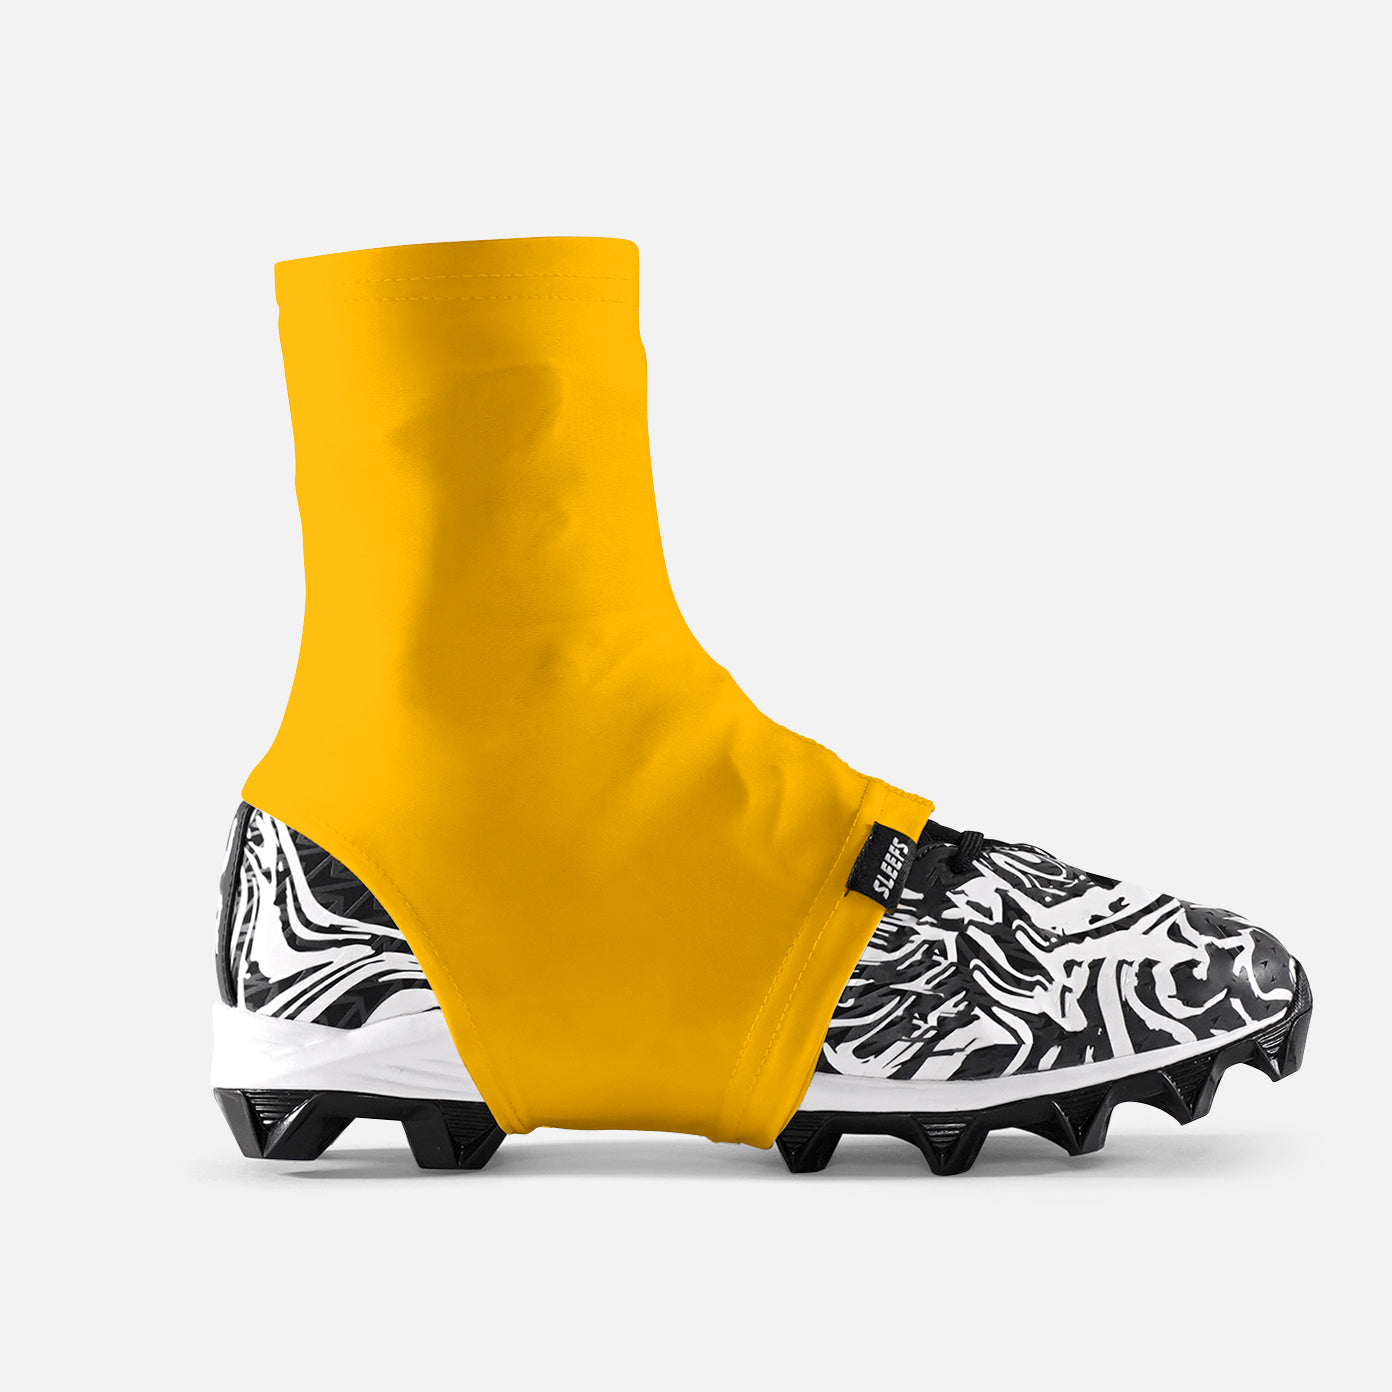 Hue Yellow Gold Kids Spats / Cleat Covers